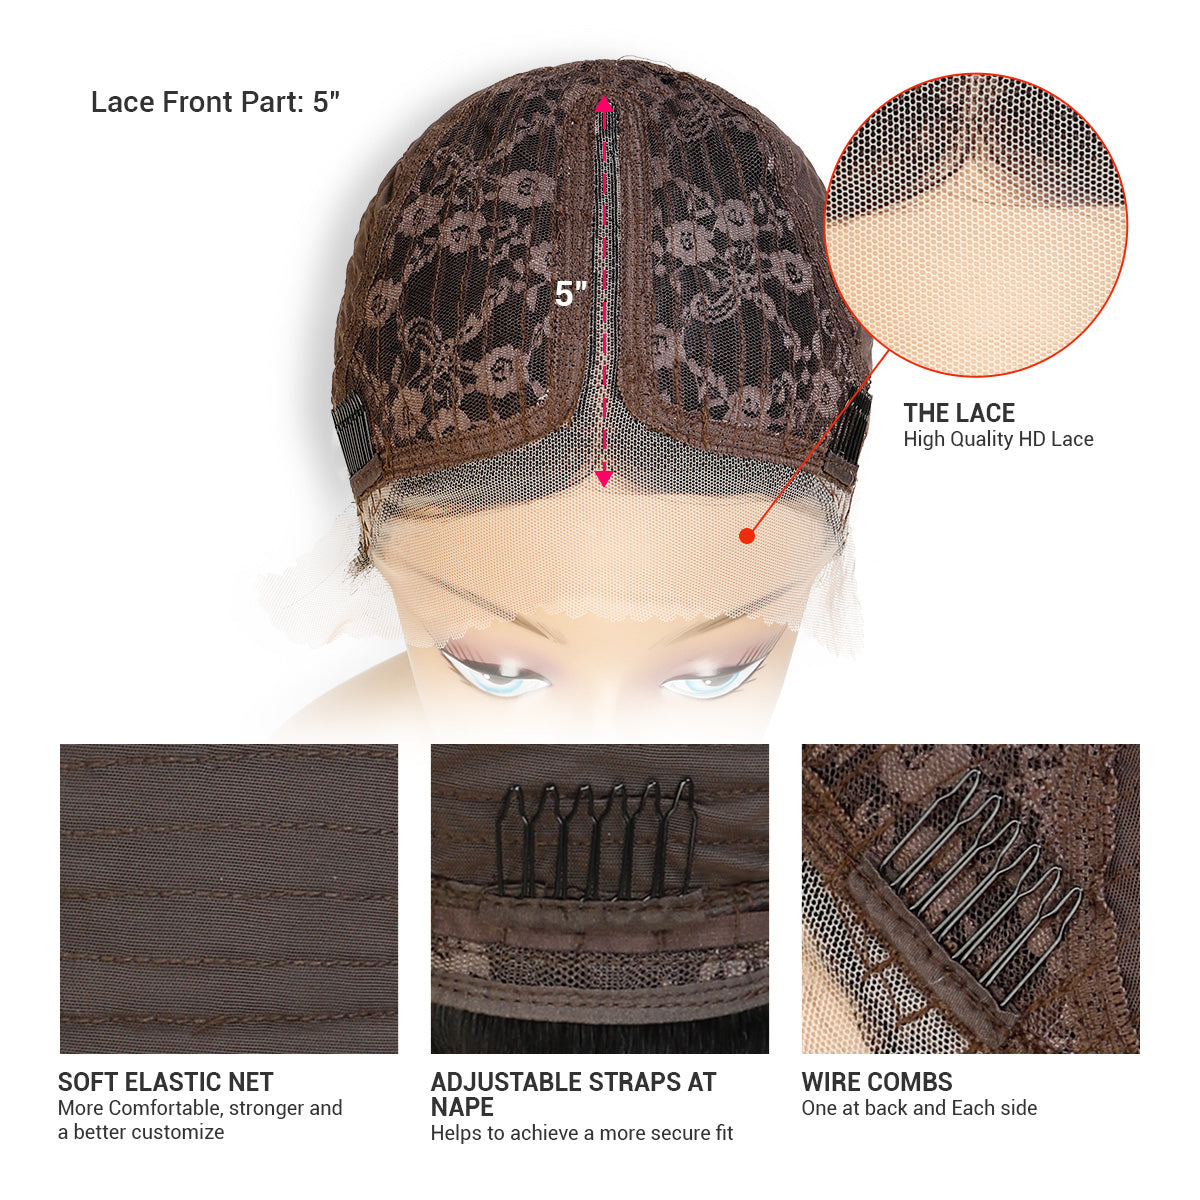 Human Hair, Lace Wig, T part, Deep part, Center Part, Middle Part, Bob, Straight, Short, Medium, Blunt Bob, Lace Front Part 5", High quality HD Lace, Soft Elastic Net, More comfortable, stronger and a better customize, Adjustable straps at nape, Helps to a more secure fit, Wire combs, One at back and Each side, Cap view